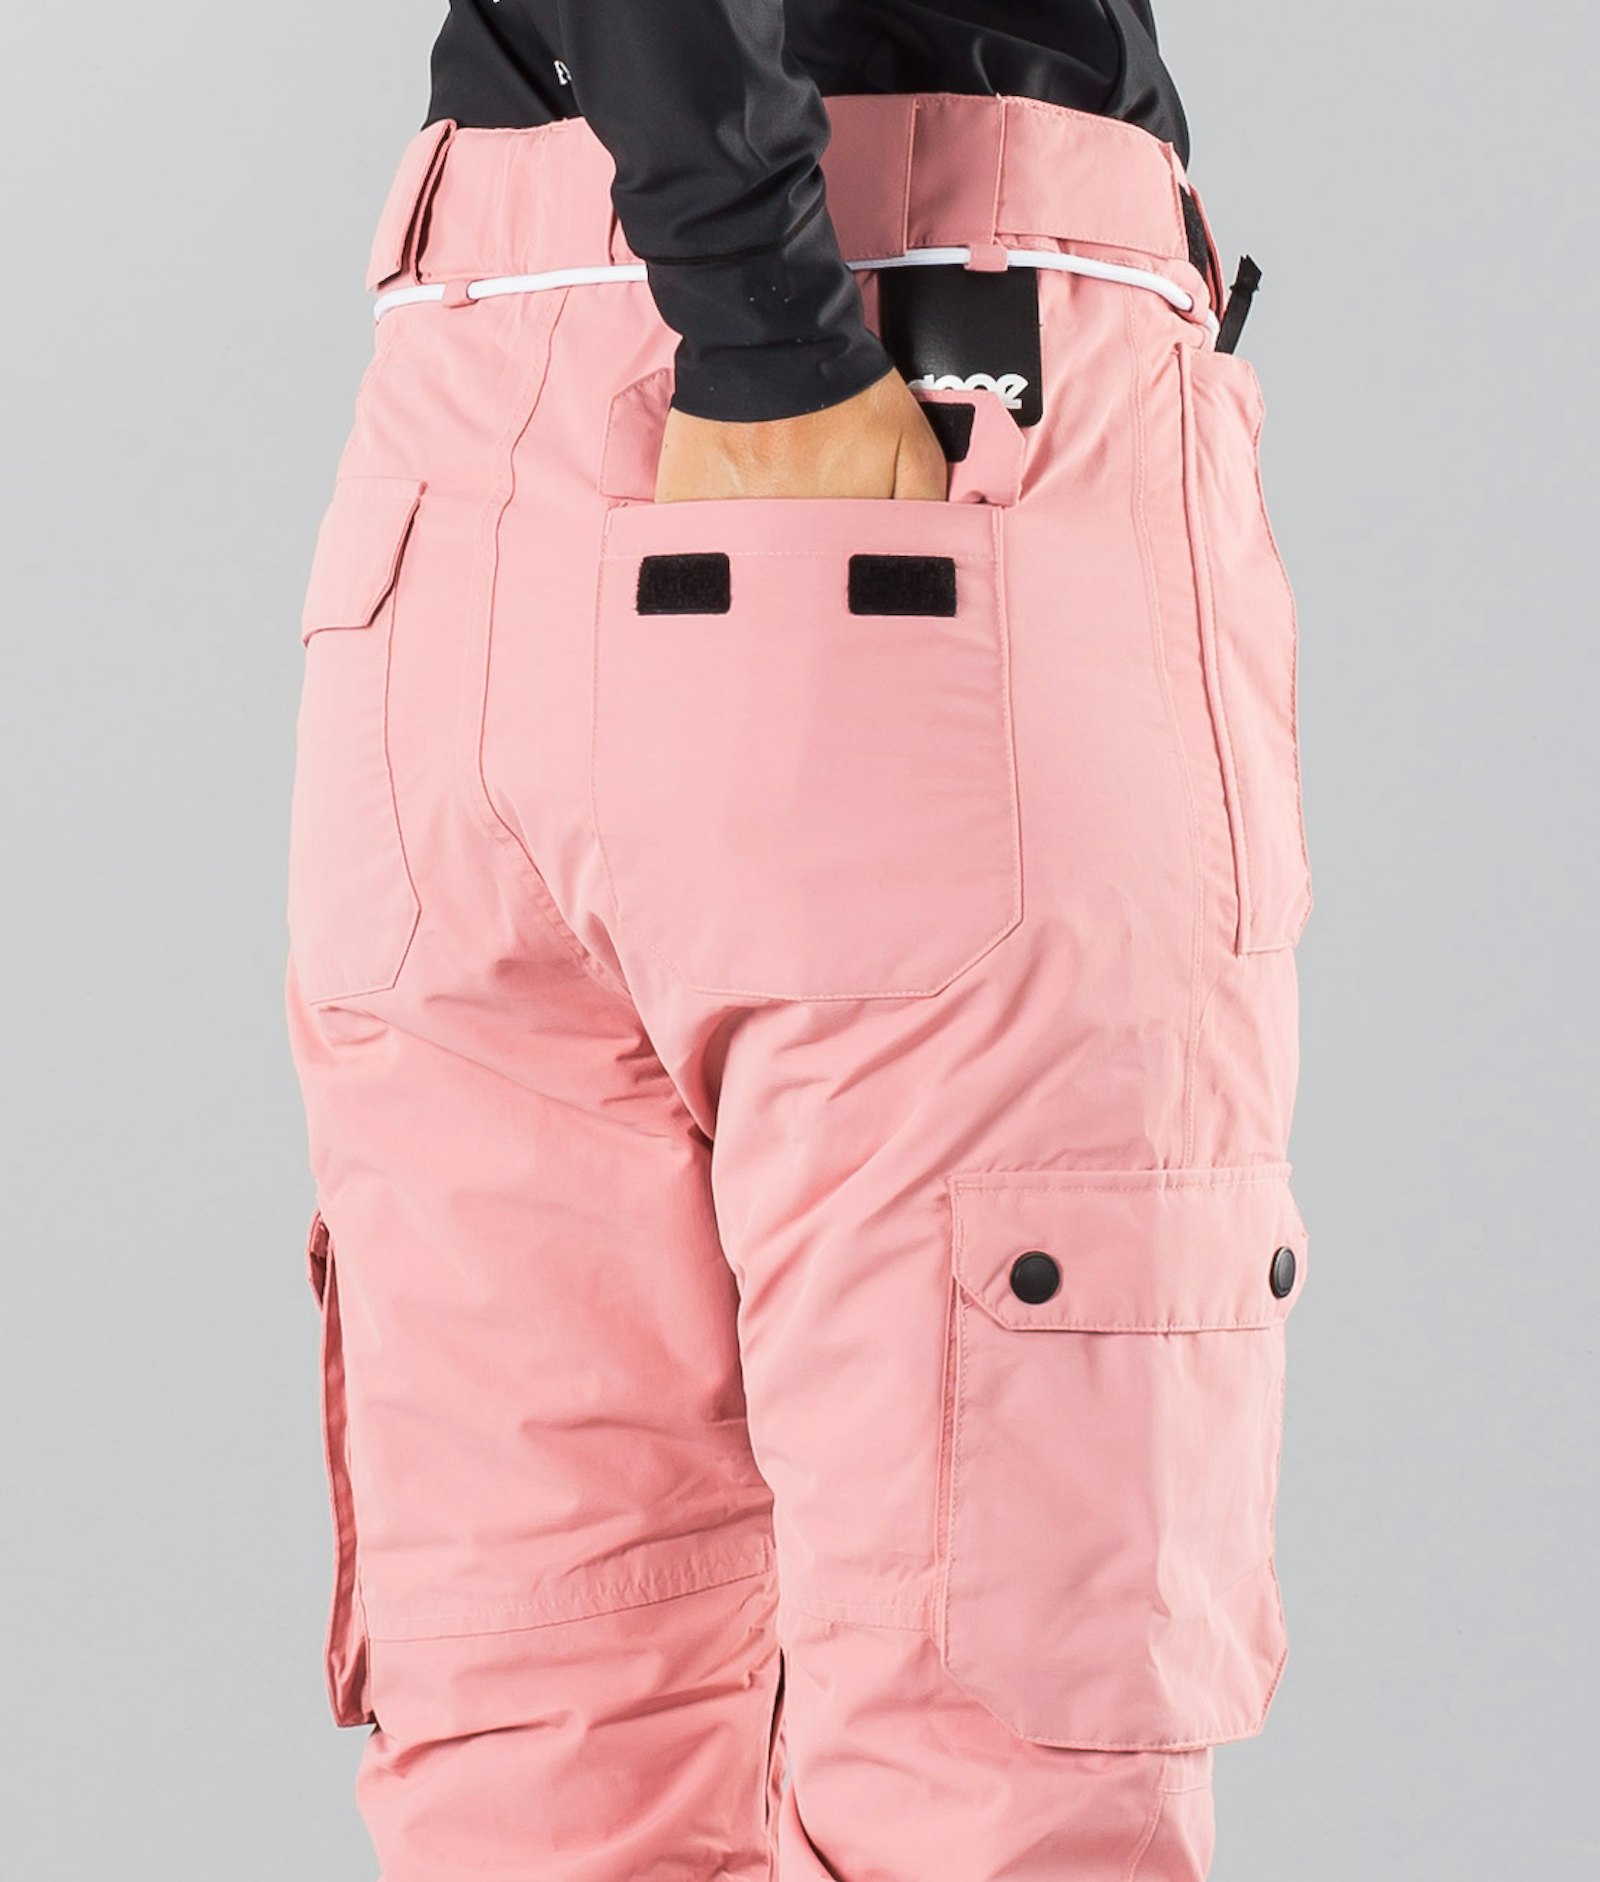 Iconic W 2018 Snowboard Pants Women Pink, Image 6 of 10